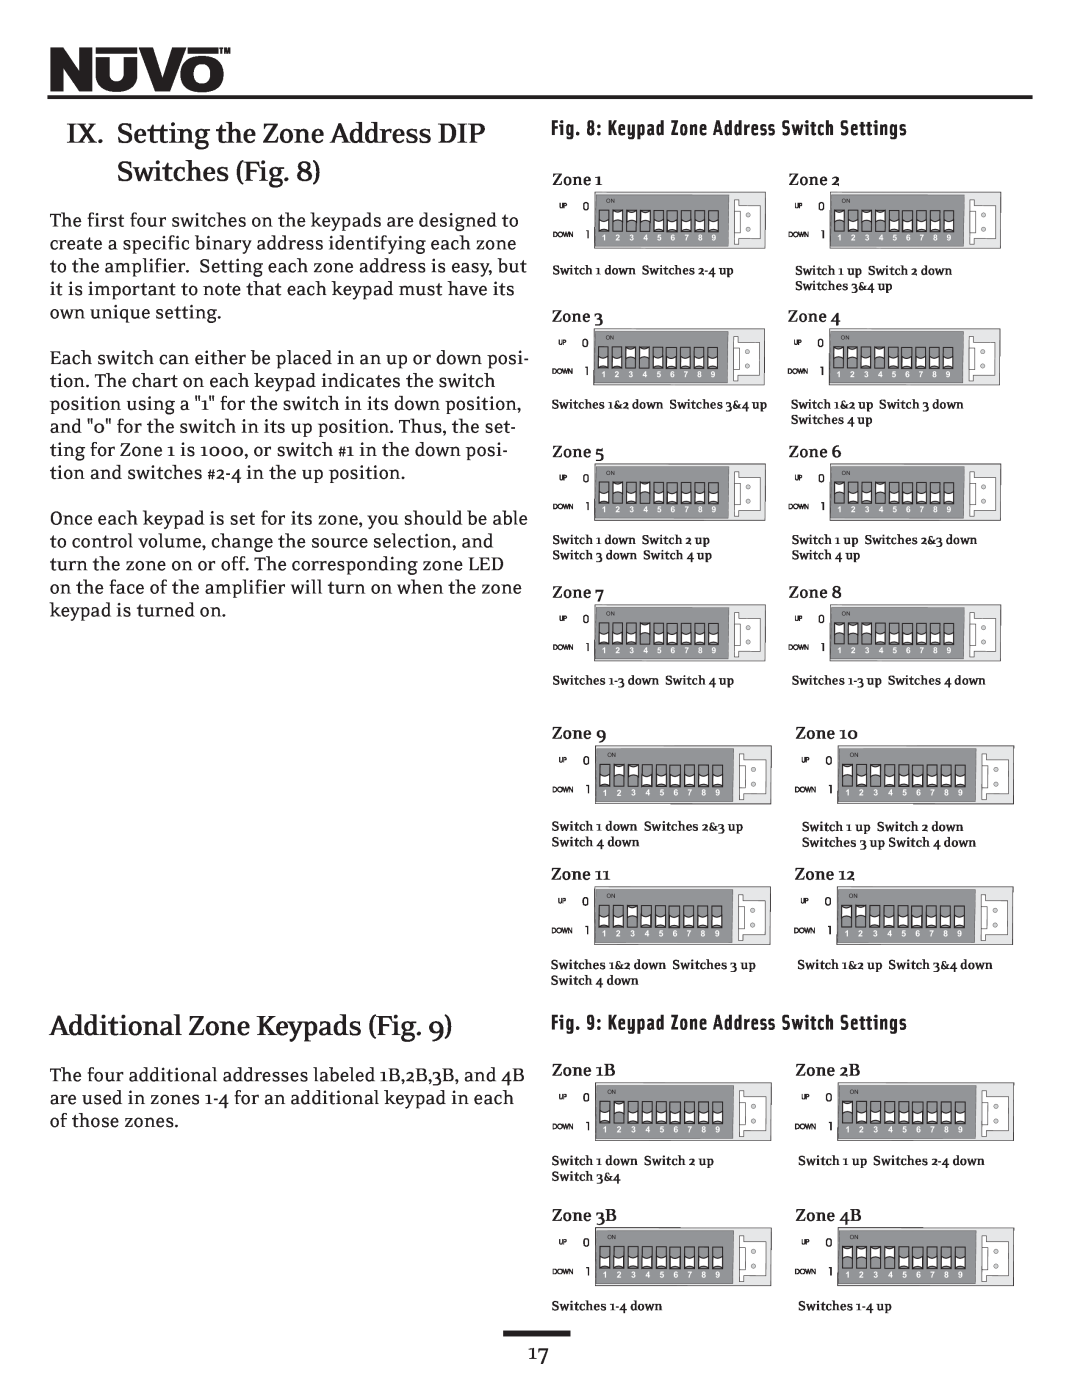 Nuvo NV-E6DMS, NV-E6DXS owner manual IX. Setting the Zone Address DIP Switches Fig, Additional Zone Keypads Fig 